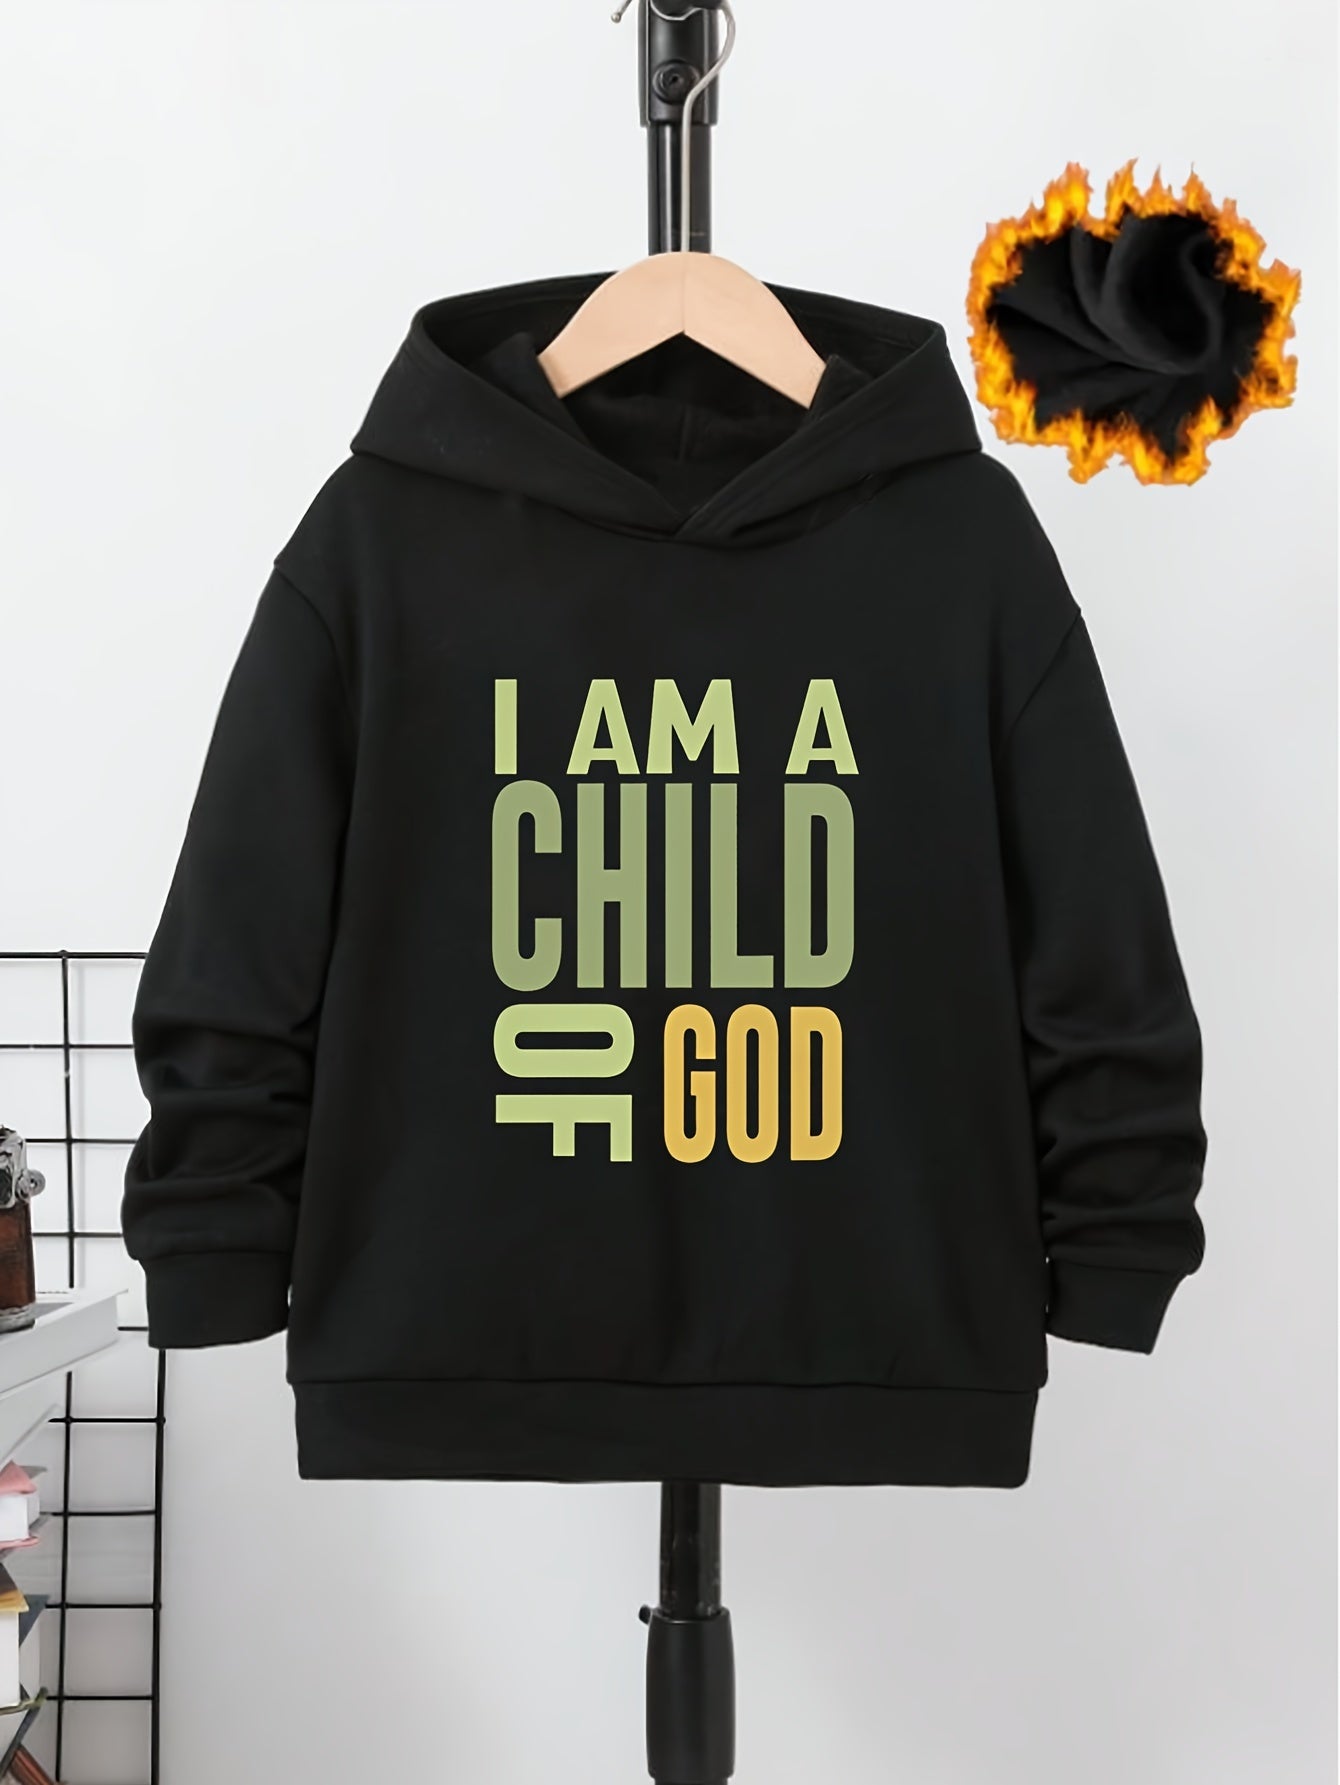 I AM A CHILD OF GOD Youth Christian Pullover Hooded Sweatshirt claimedbygoddesigns